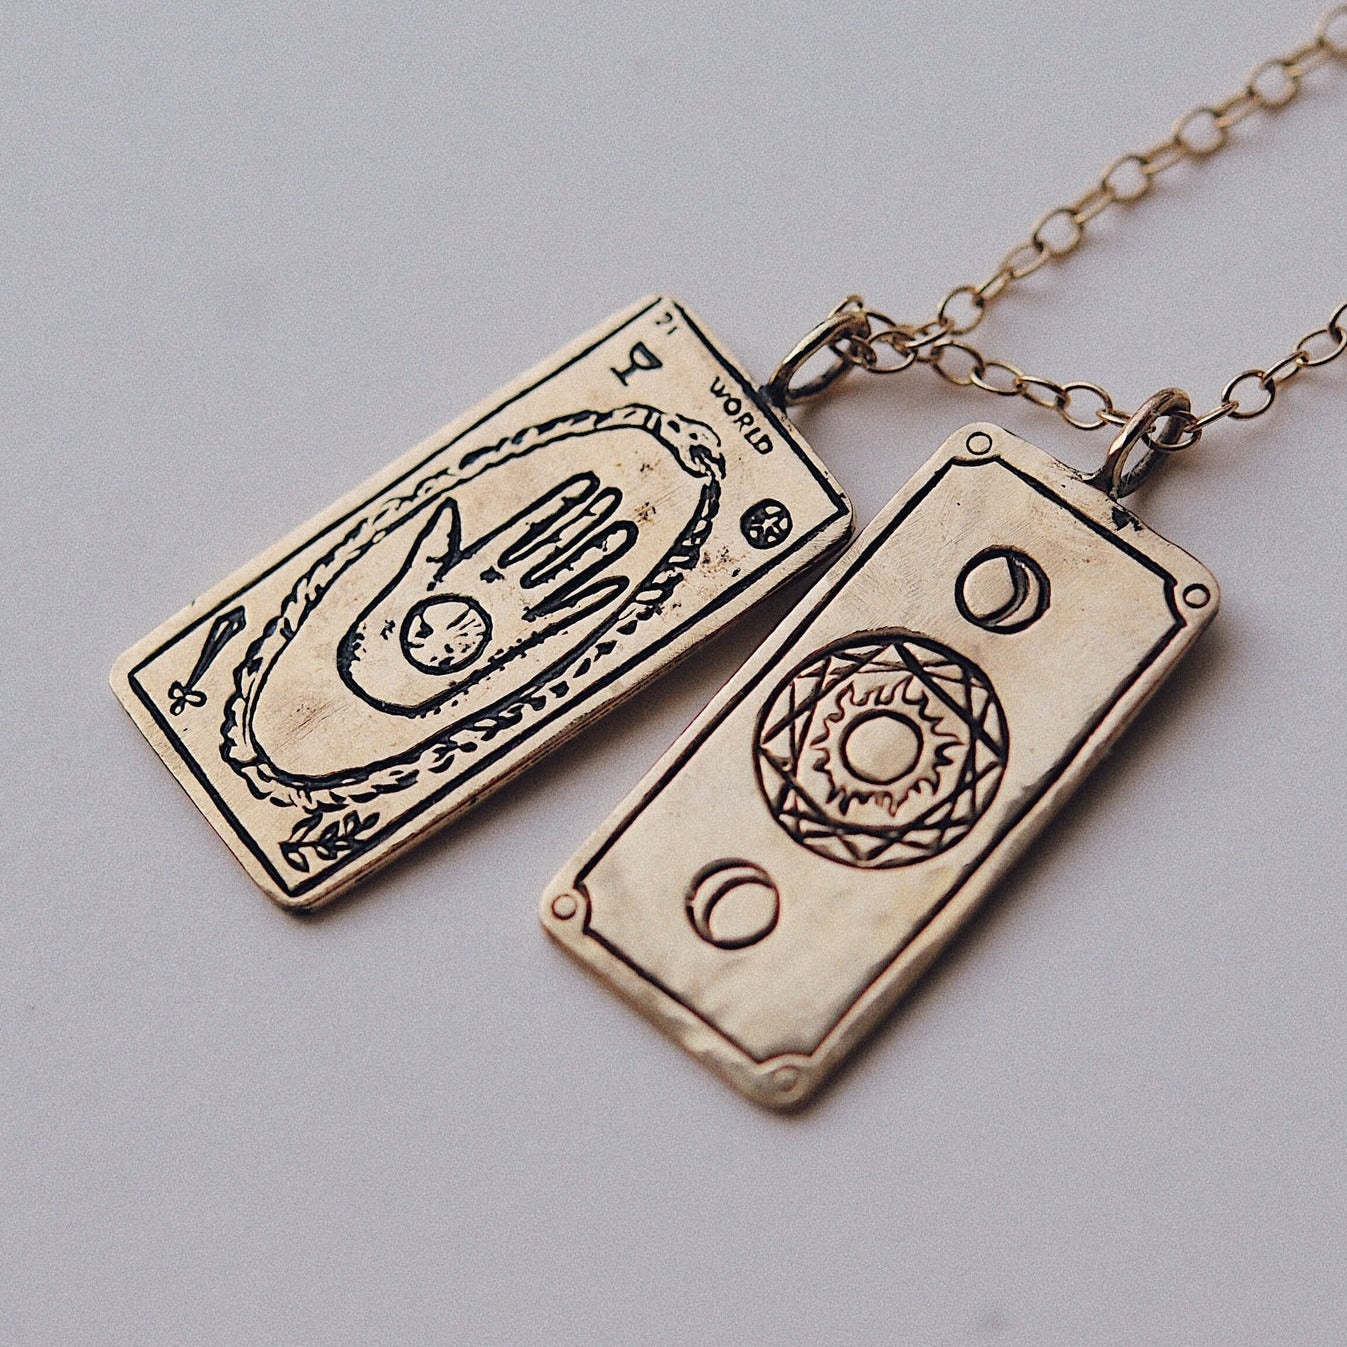 The World Tarot Card Necklace - Magpie Jewellery